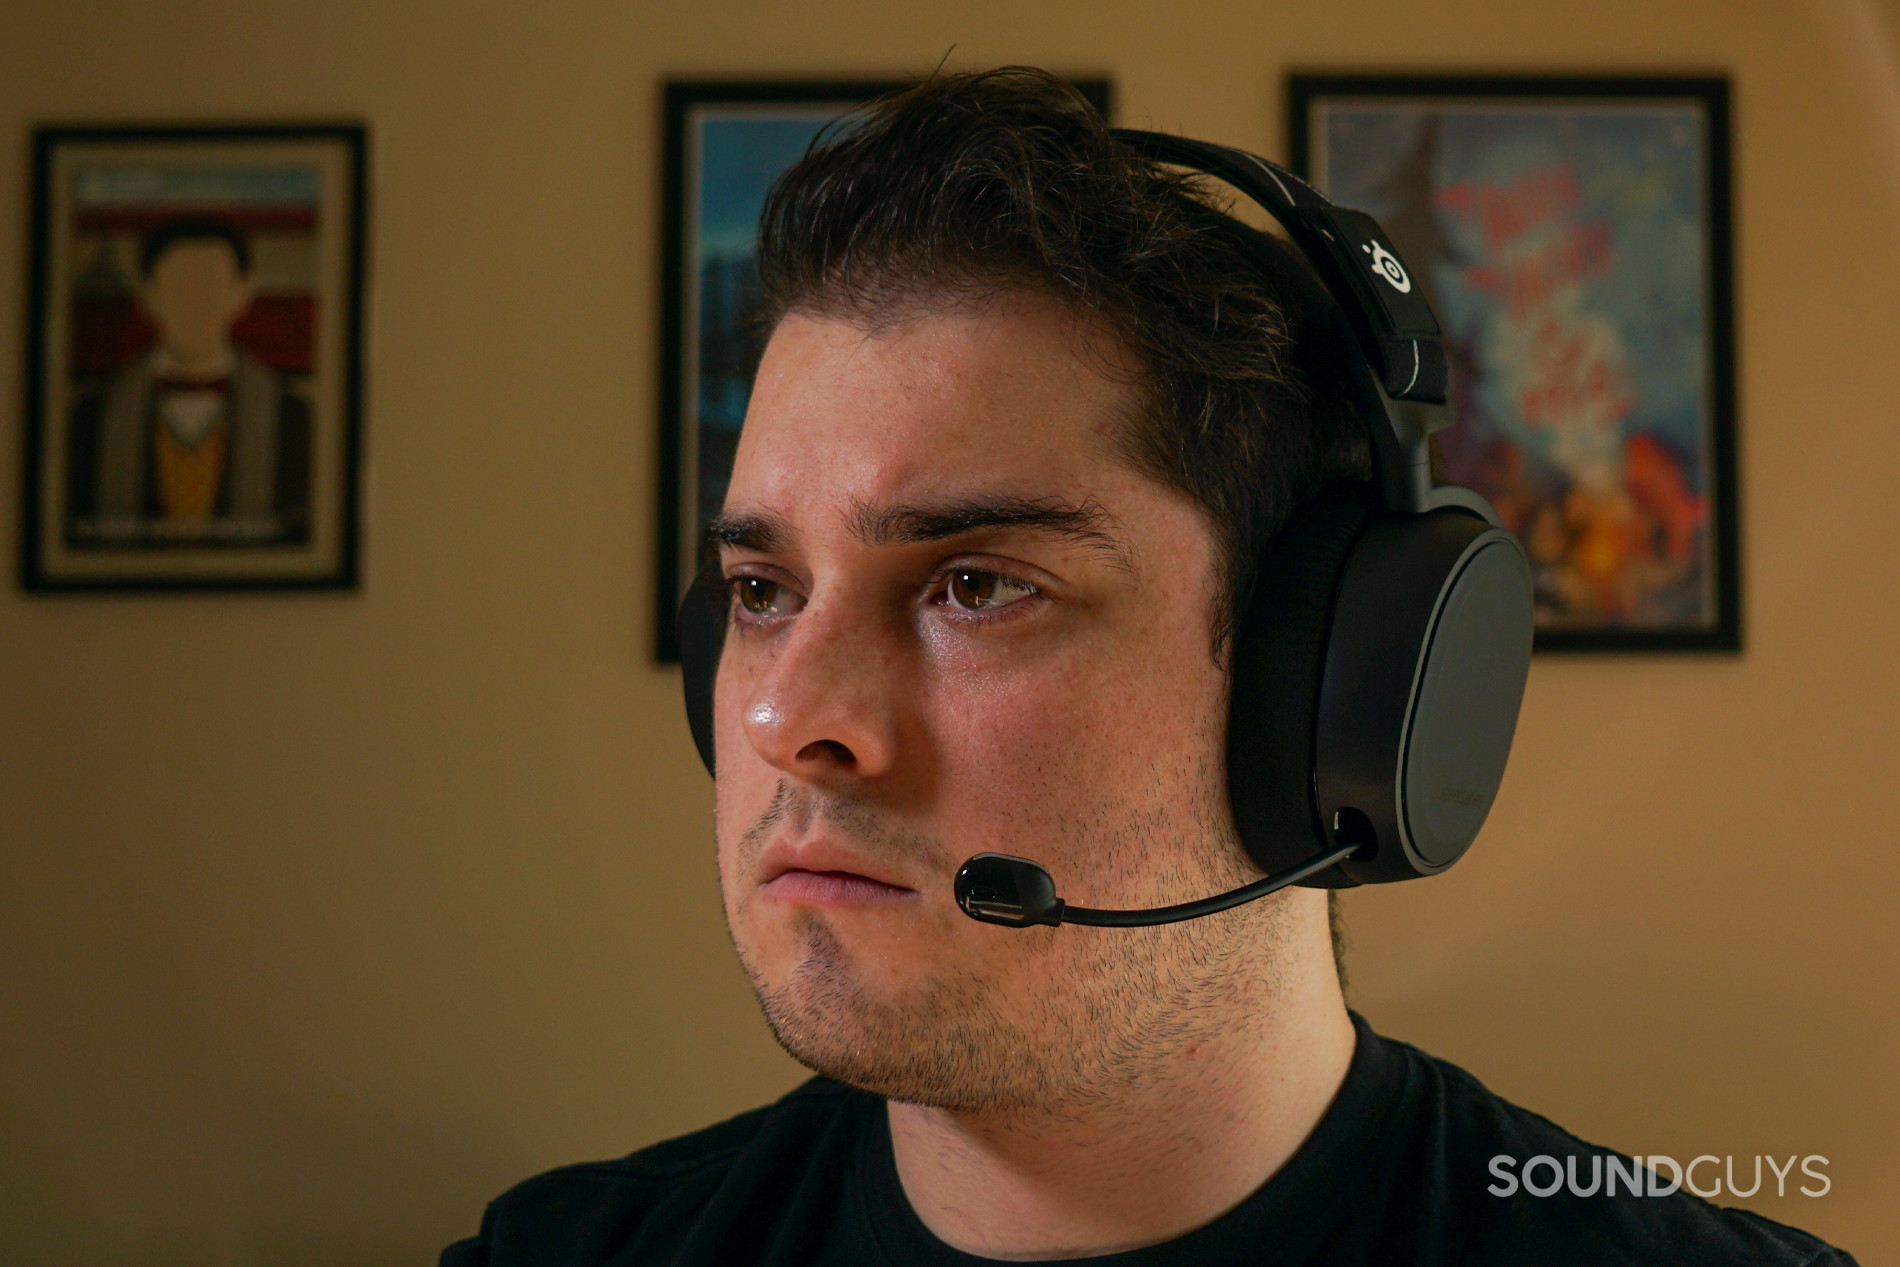 A man wears the SteelSeries Arctis 9 gaming headset in front of posters for My Brother, My Brother and Me, and Canadian Heritage Minutes.